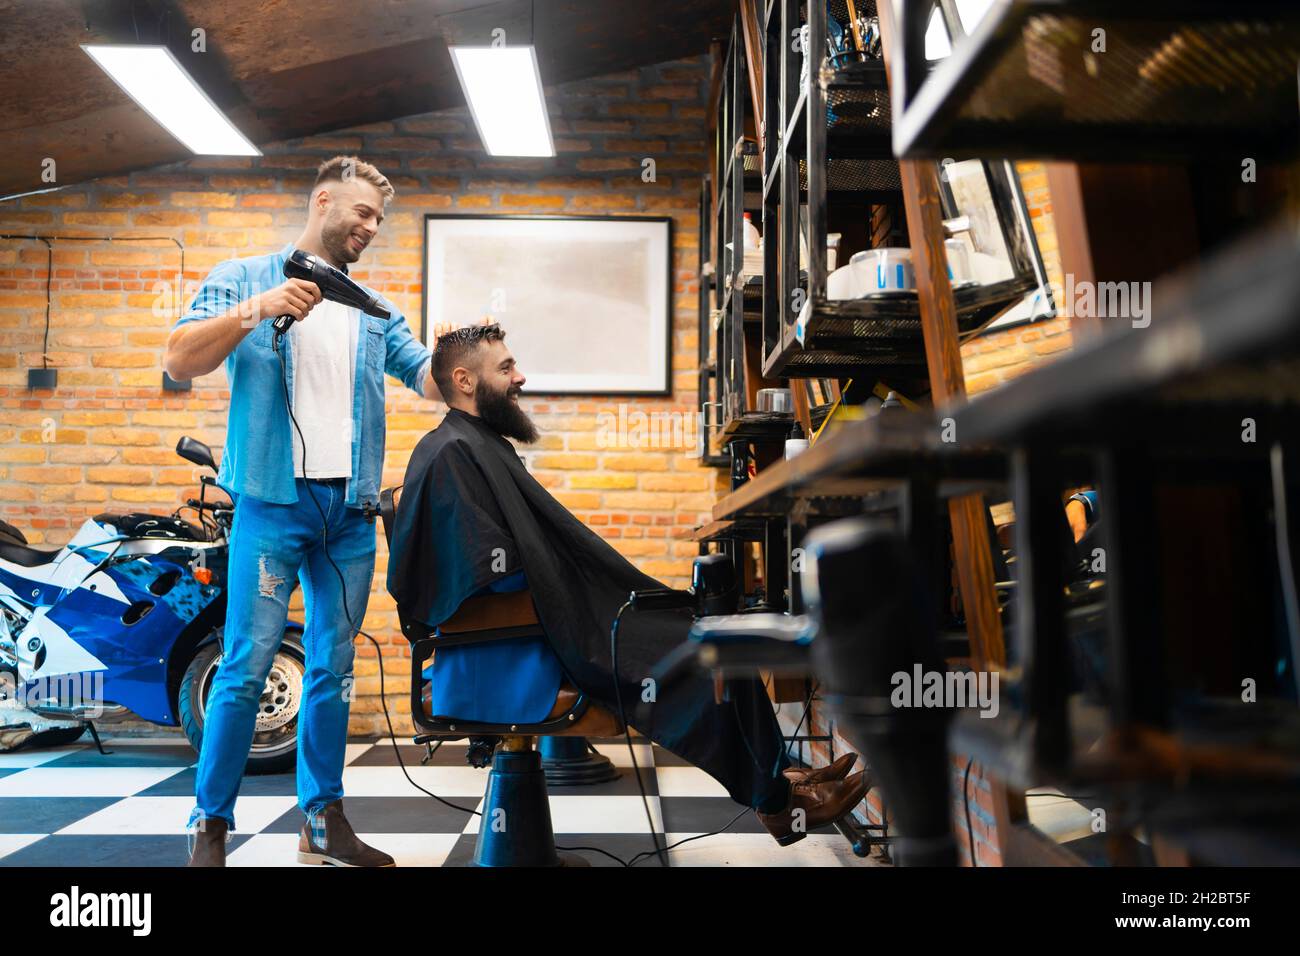 Male hairstylist drying his customers hair Stock Photo